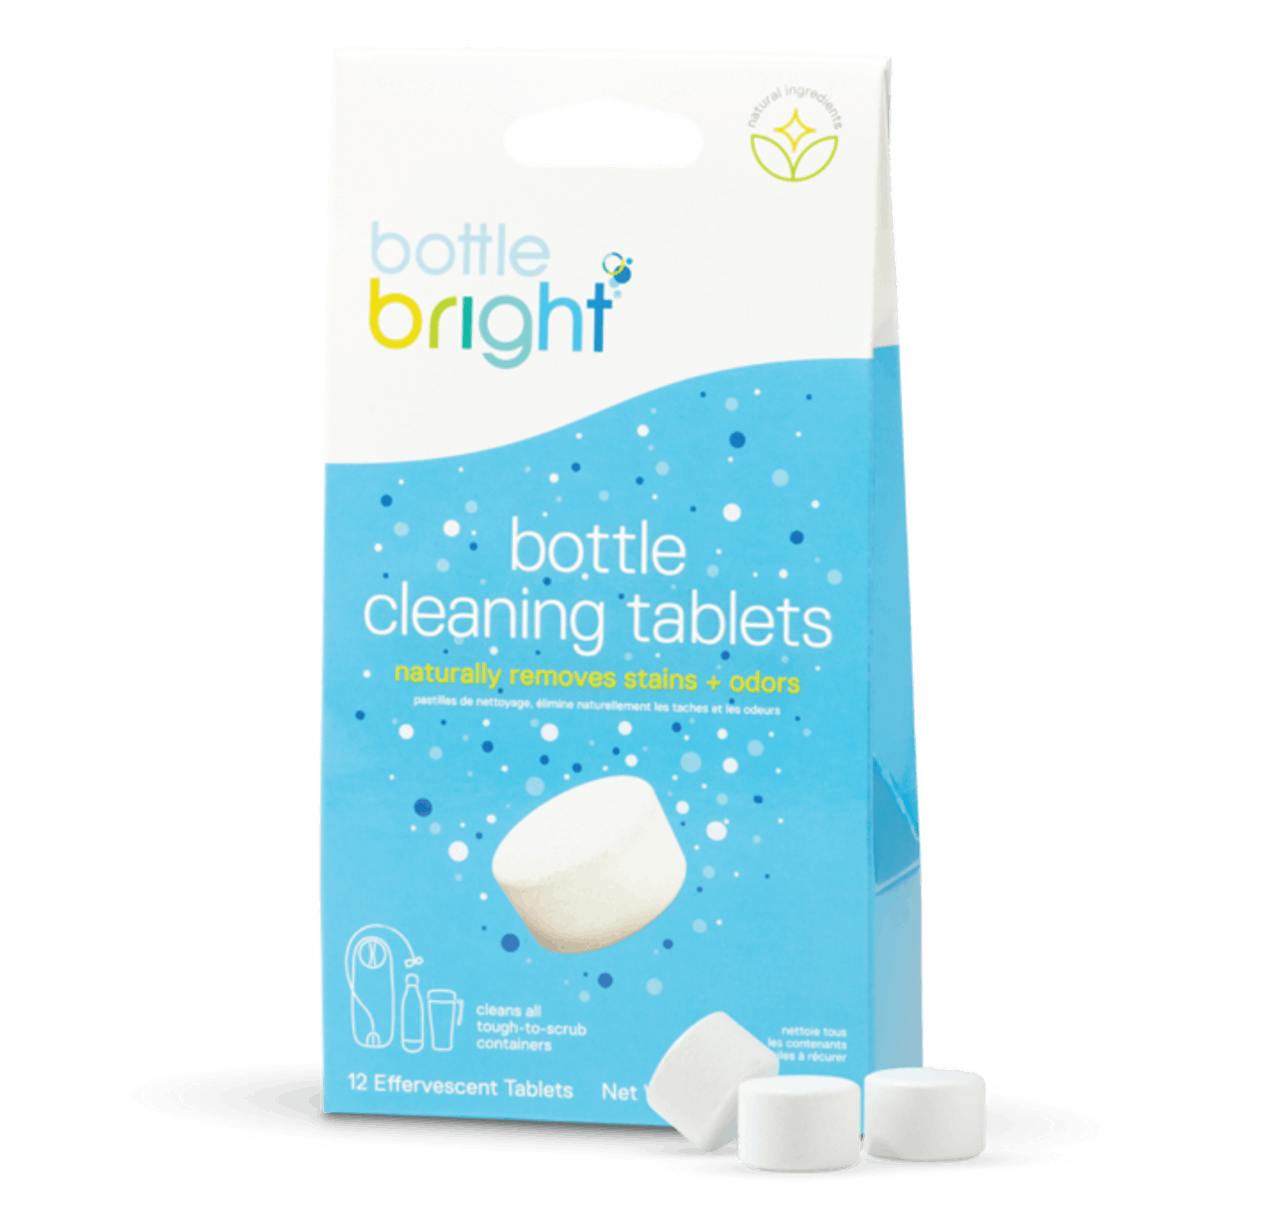 Product image of Bottle Bright Bottle Cleaning Tablets